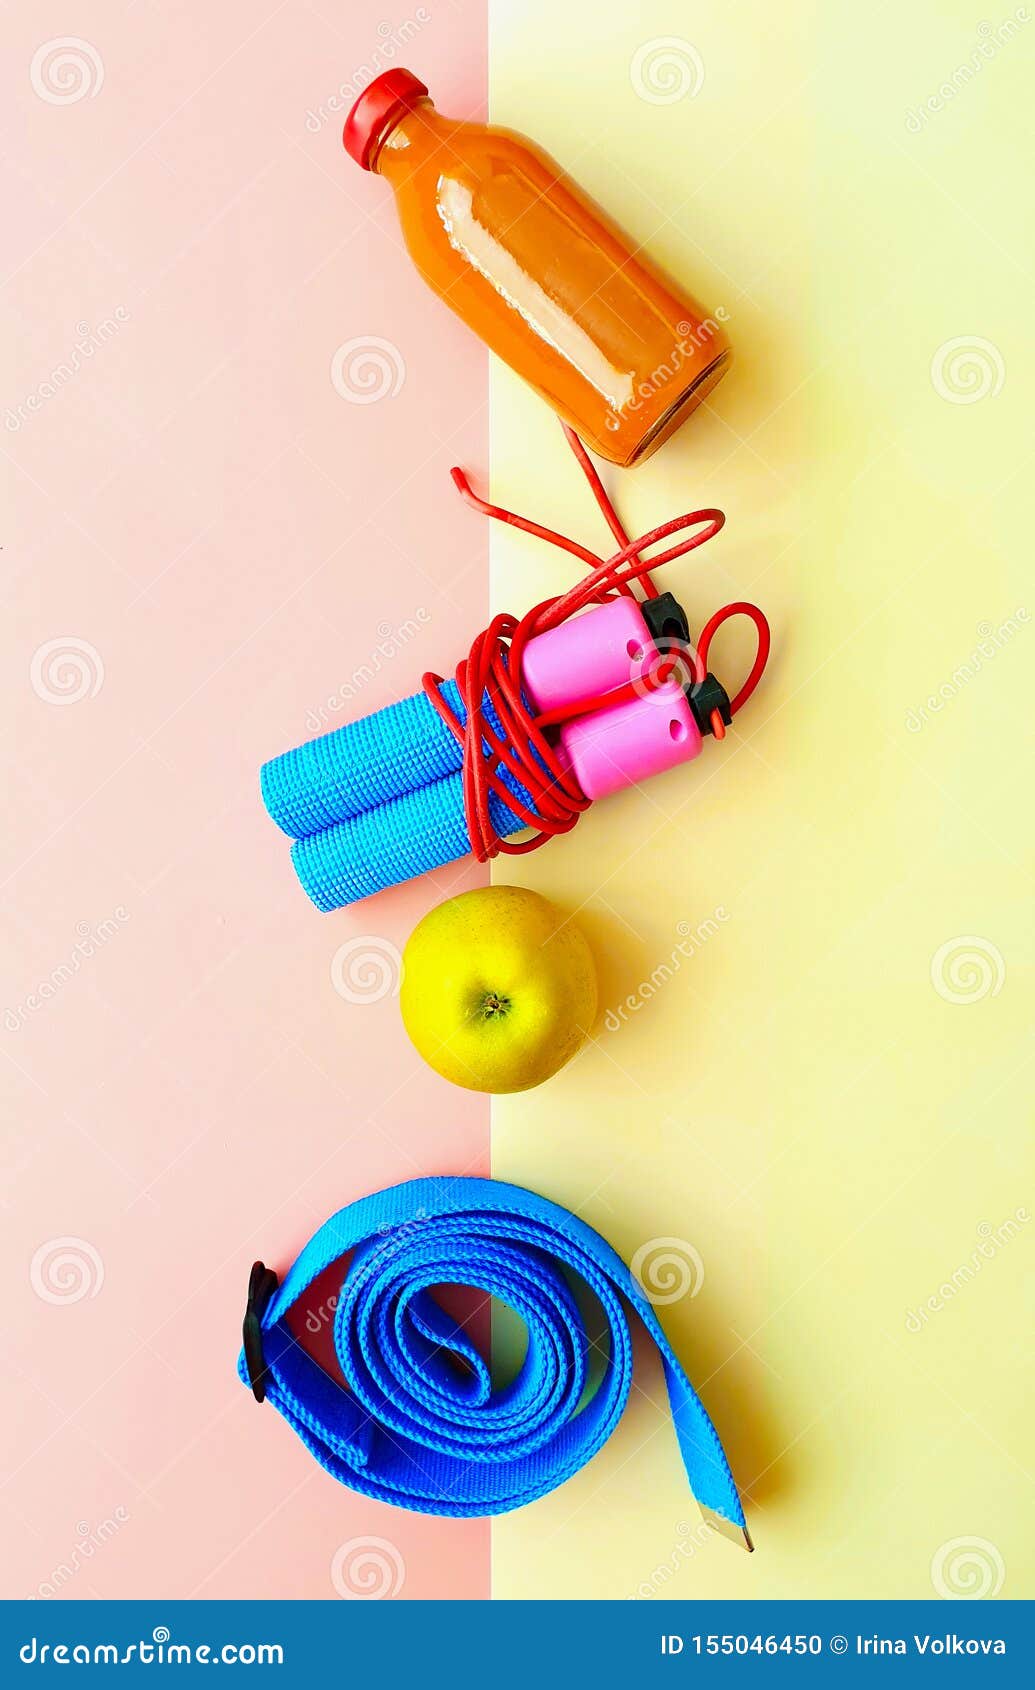 Sport Fitness Training Expander Exercise Equipment Sport Still Life Healthy  Lifestyle Motivation Quotes Banner Concept Relaxat Stock Photo - Image of  still, lifestyle: 155046450